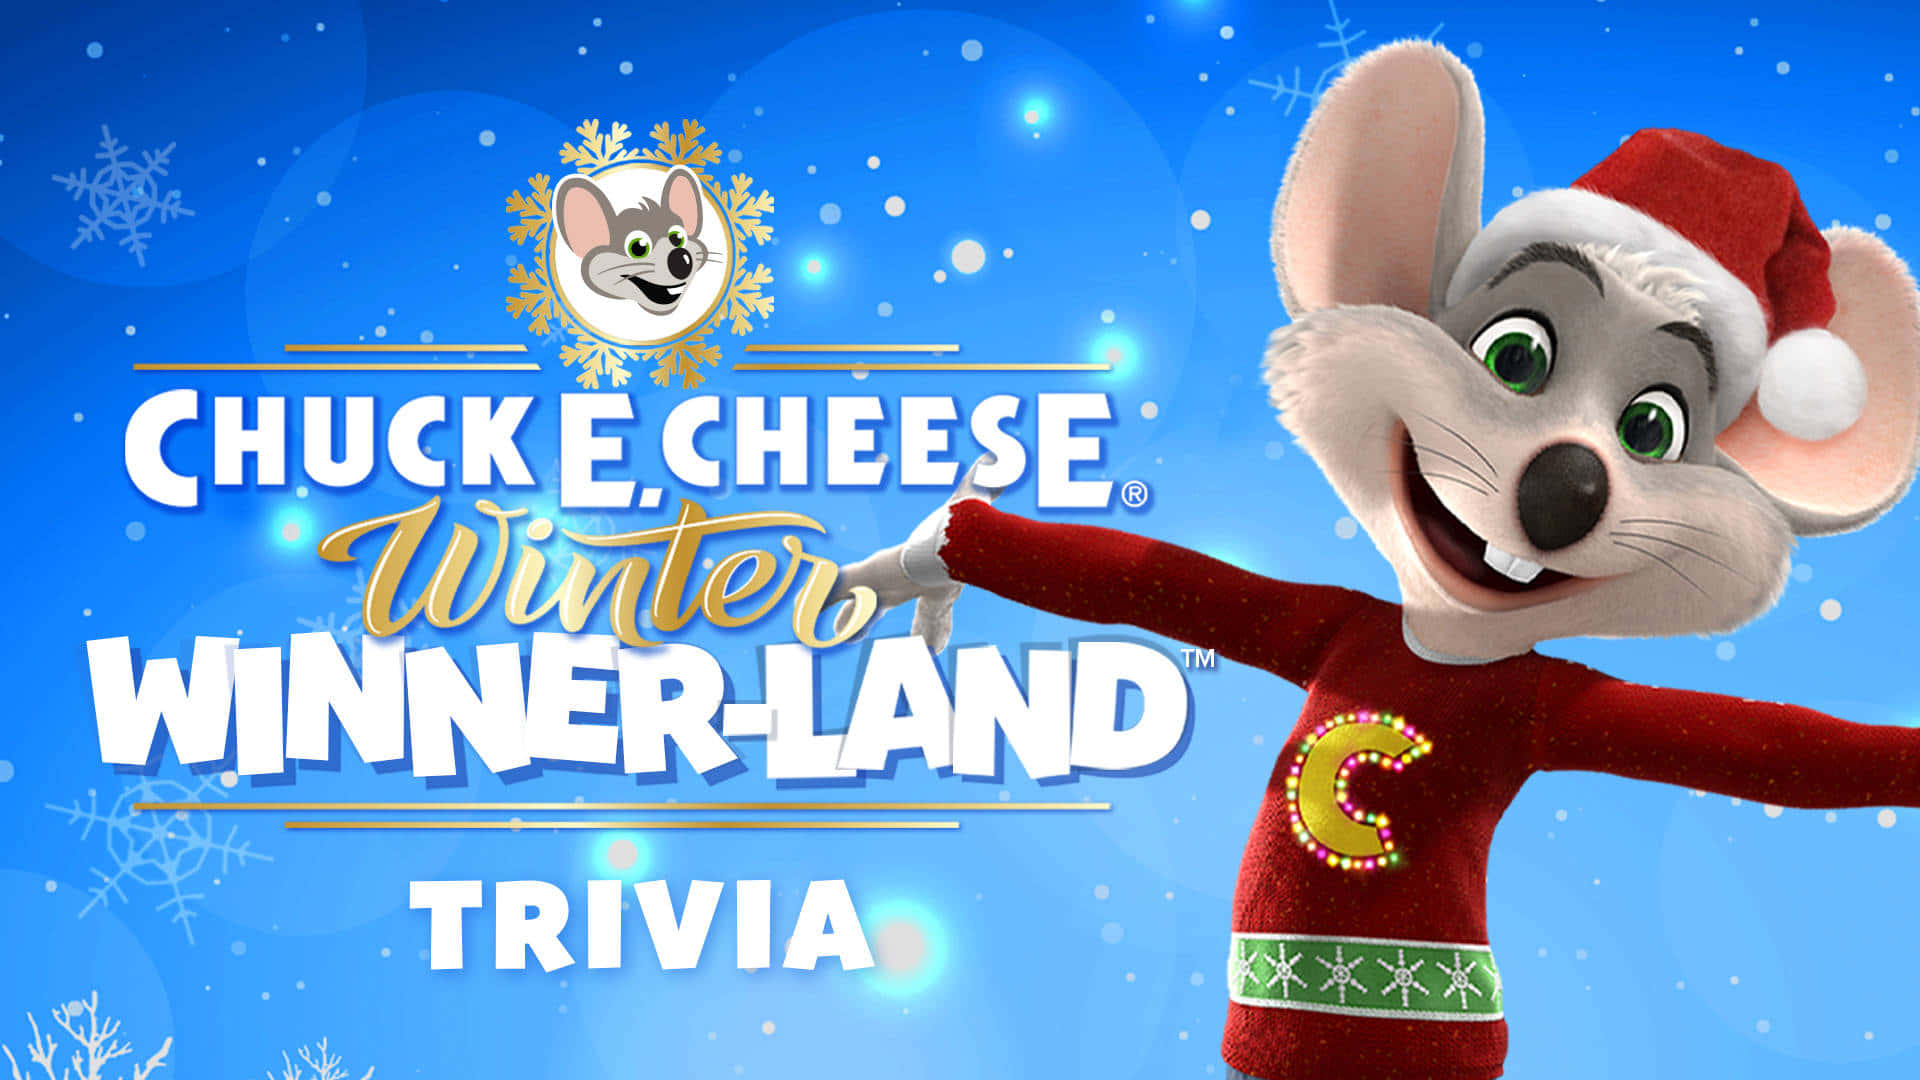 Celebrate With Everyone's Favorite Mouse, Chuck E. Cheese